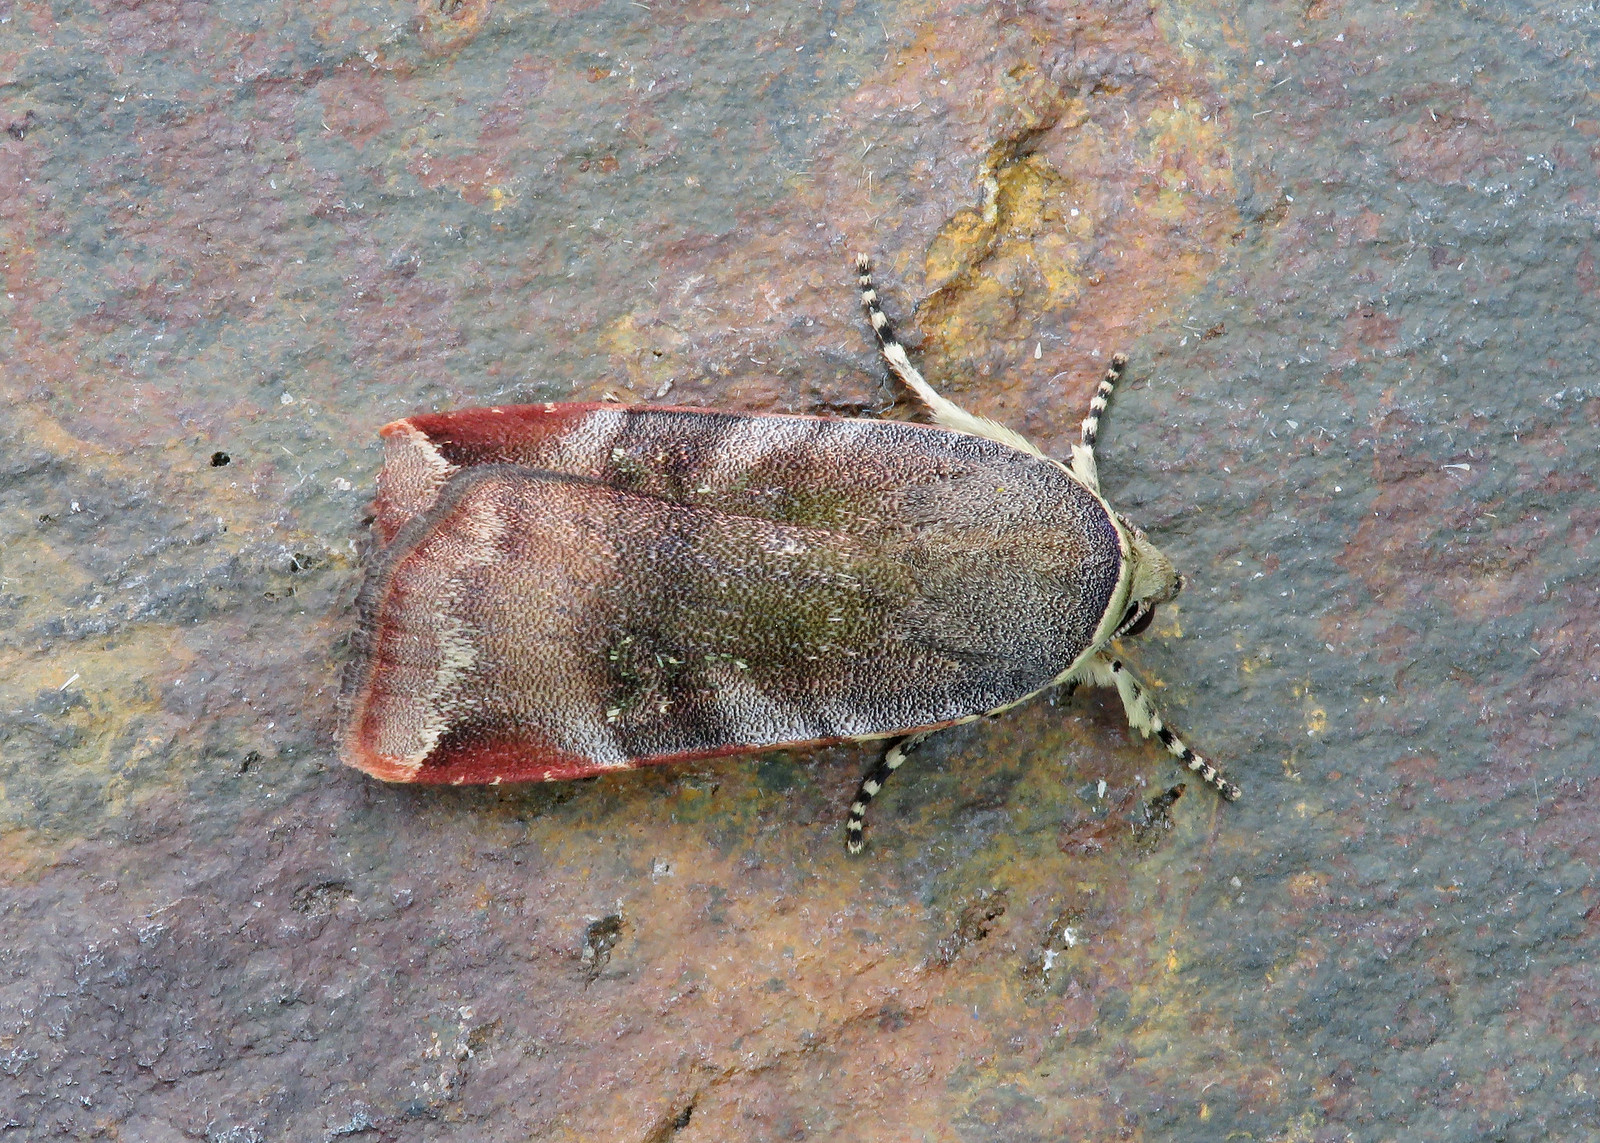 73.348 Lesser Broad-bordered Yellow Underwing - Noctua janthe